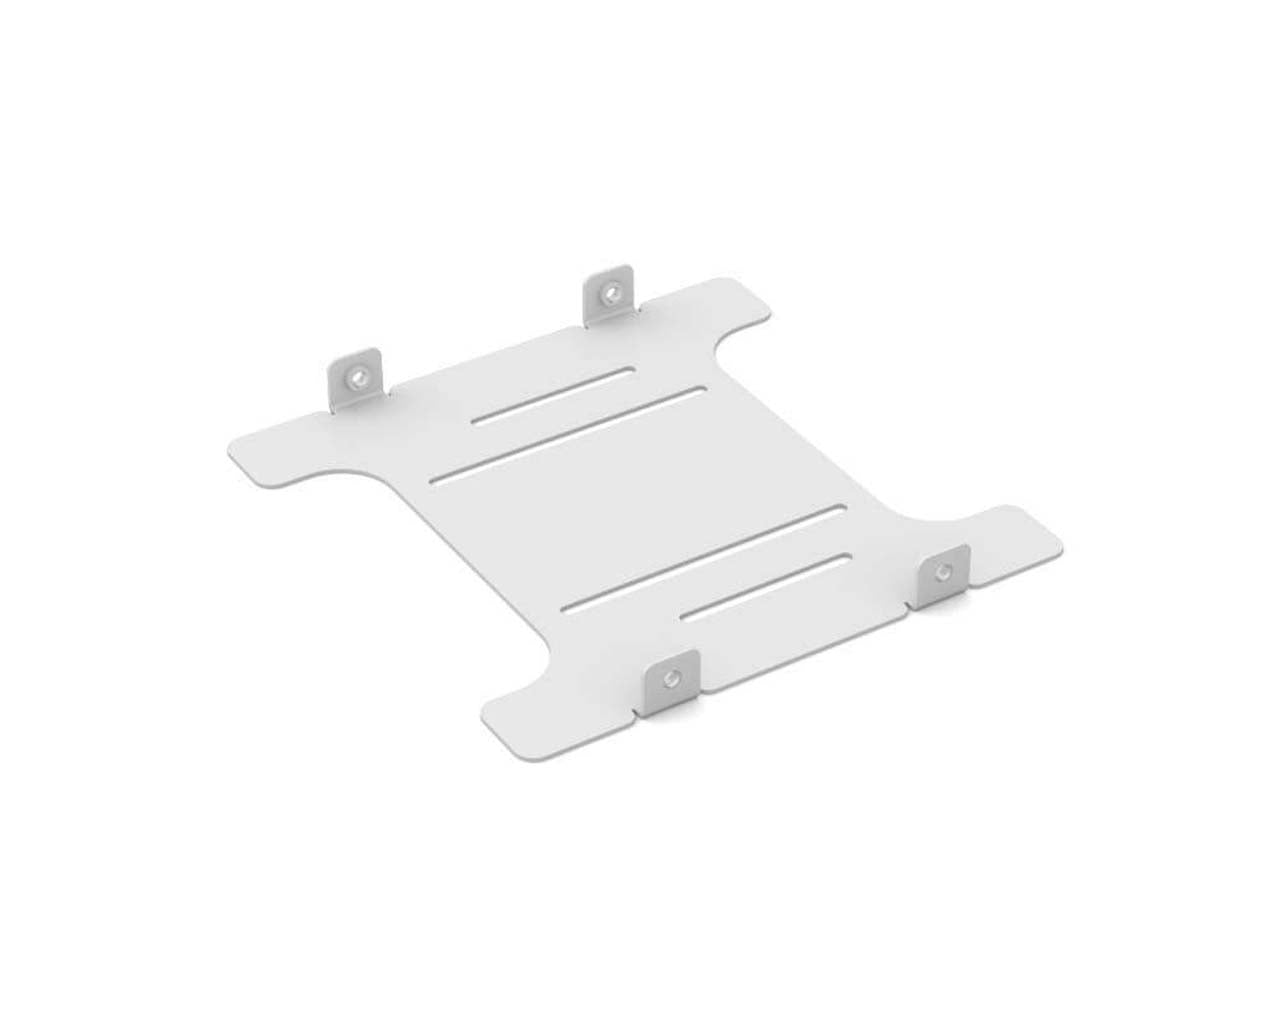 Praxis WetBenchSX 5.25 Bay HDD/SSD Adapter Bracket - PrimoChill - KEEPING IT COOL White